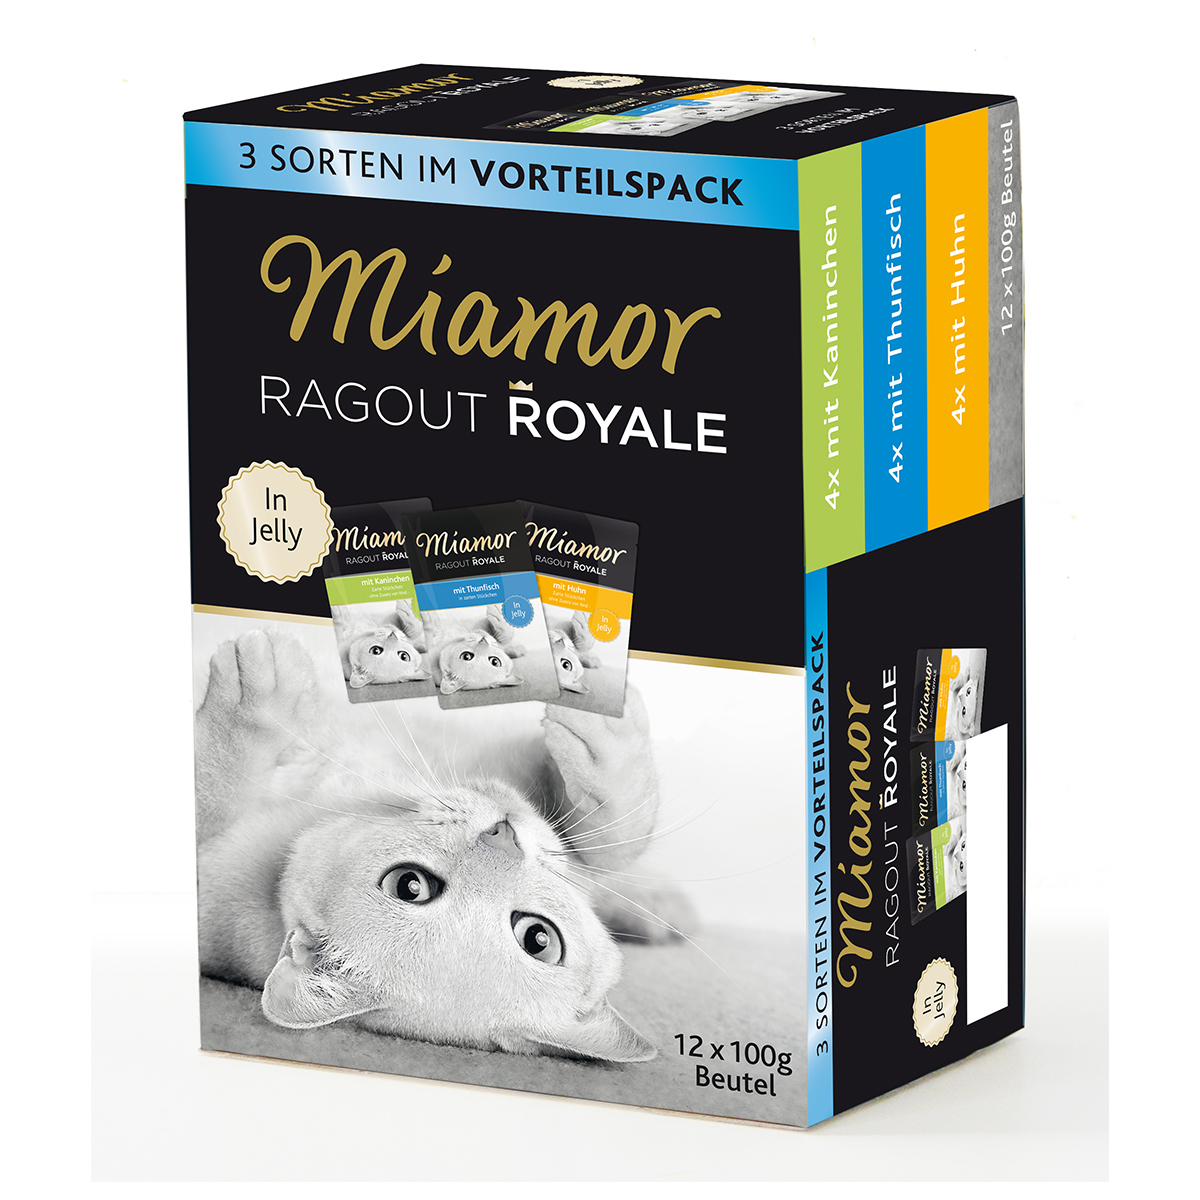 Miamor Ragout Royale Huhn, Thunfisch, Kaninchen in Jelly Multibox Adult 12x100g